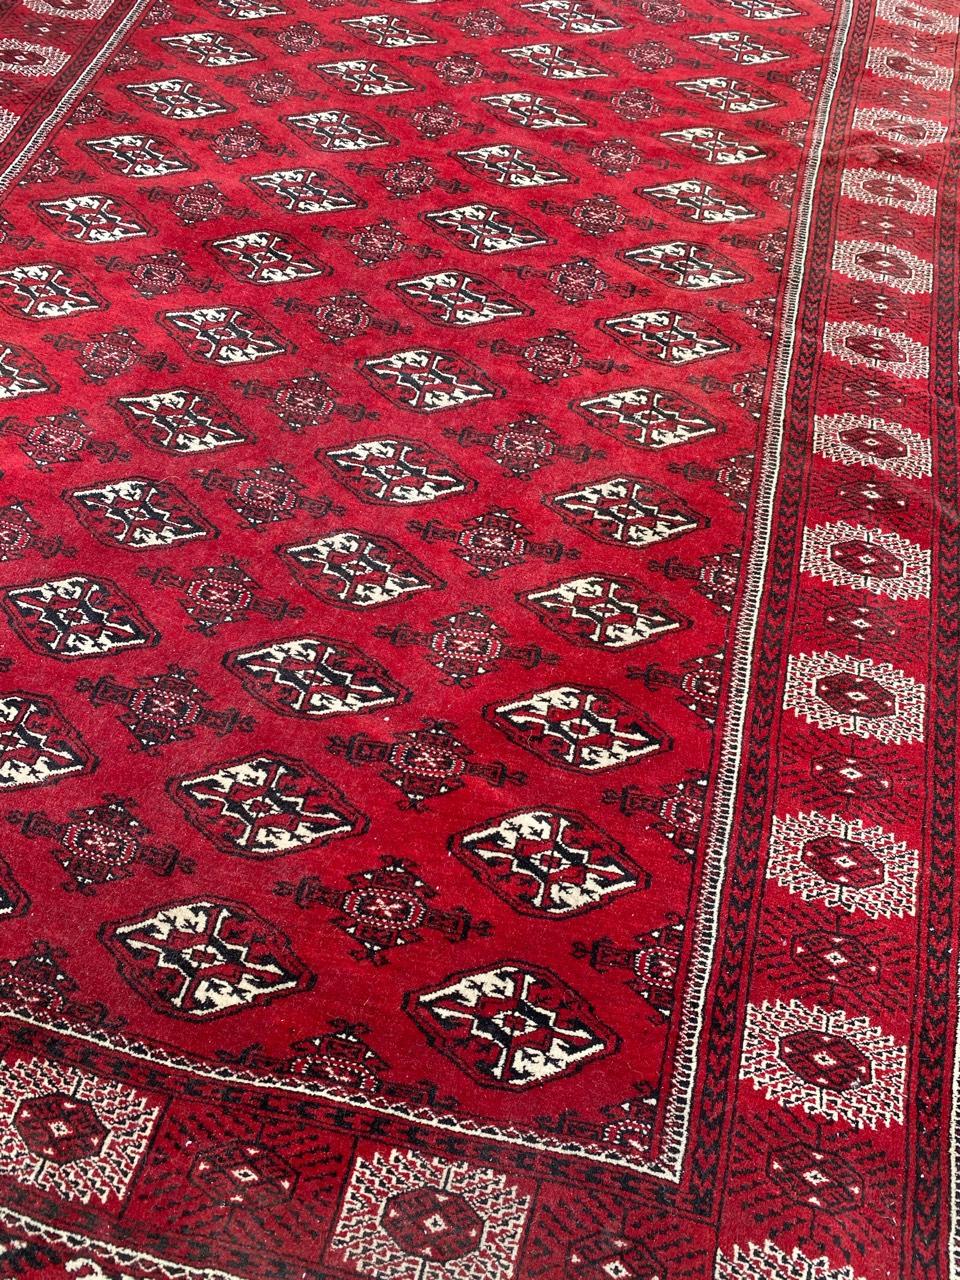 Nice midcentury Afghan rug with a beautiful Bokhara design and red field color with black and white, entirely hand knotted with wool velvet on wool foundation.

✨✨✨
